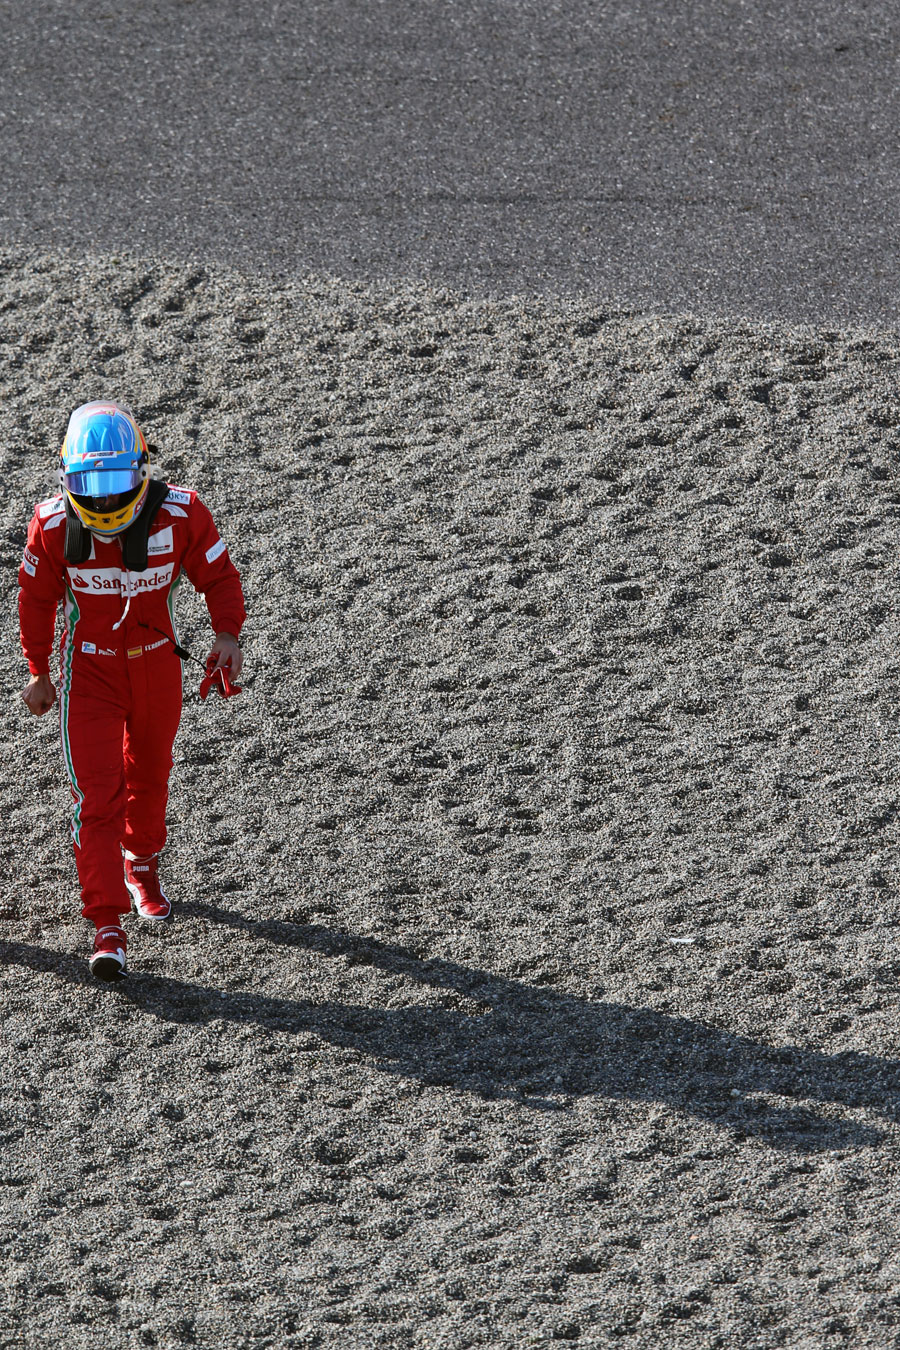 Fernando Alonso walks away from his car after spinning out at turn one